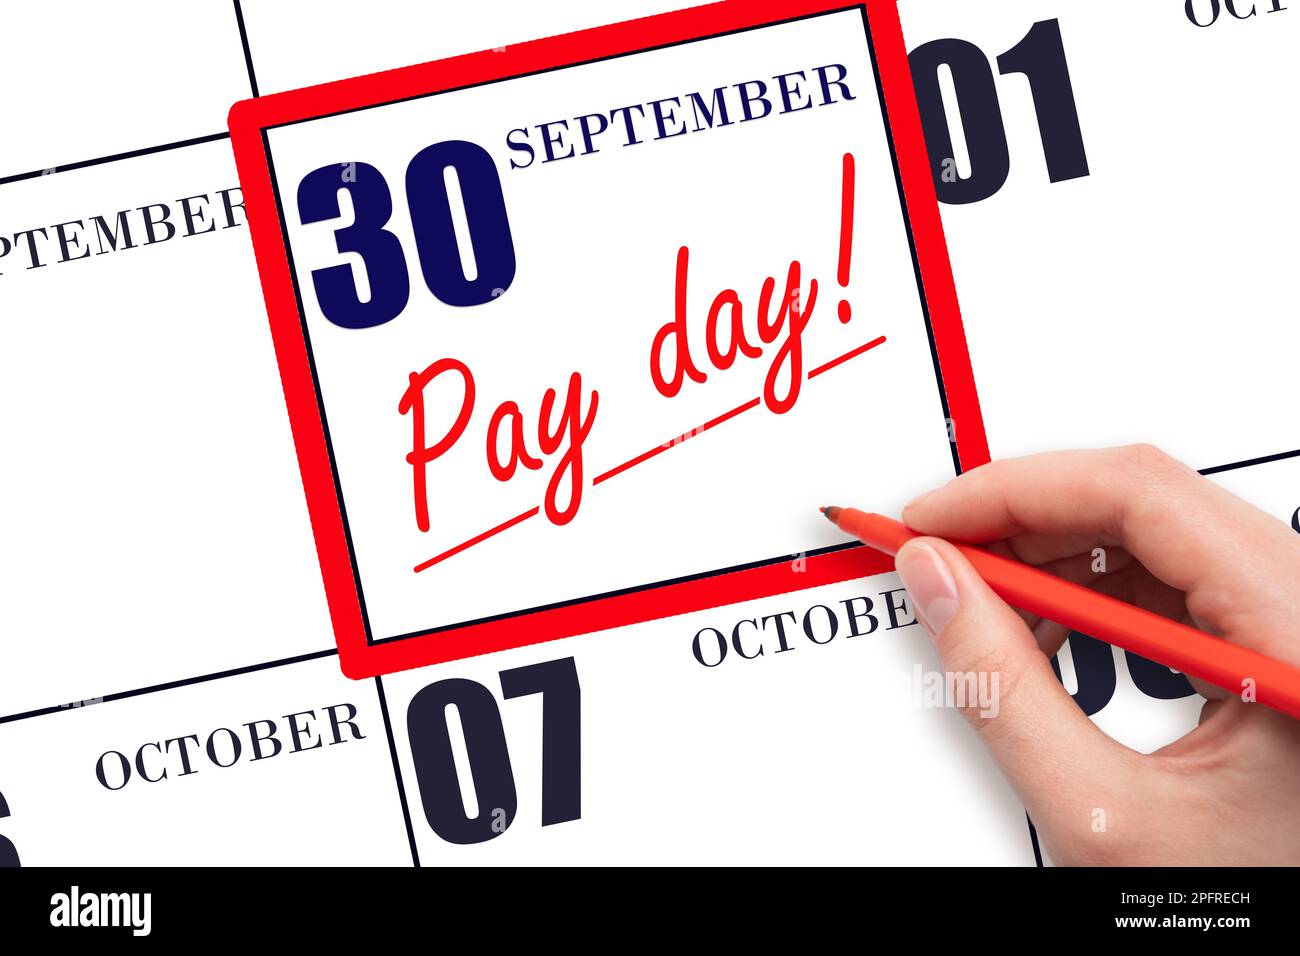 30th day of September. Hand writing text PAY DATE on calendar date September  30 and underline it. Payment due date.  Reminder concept of payment. Aut Stock Photo